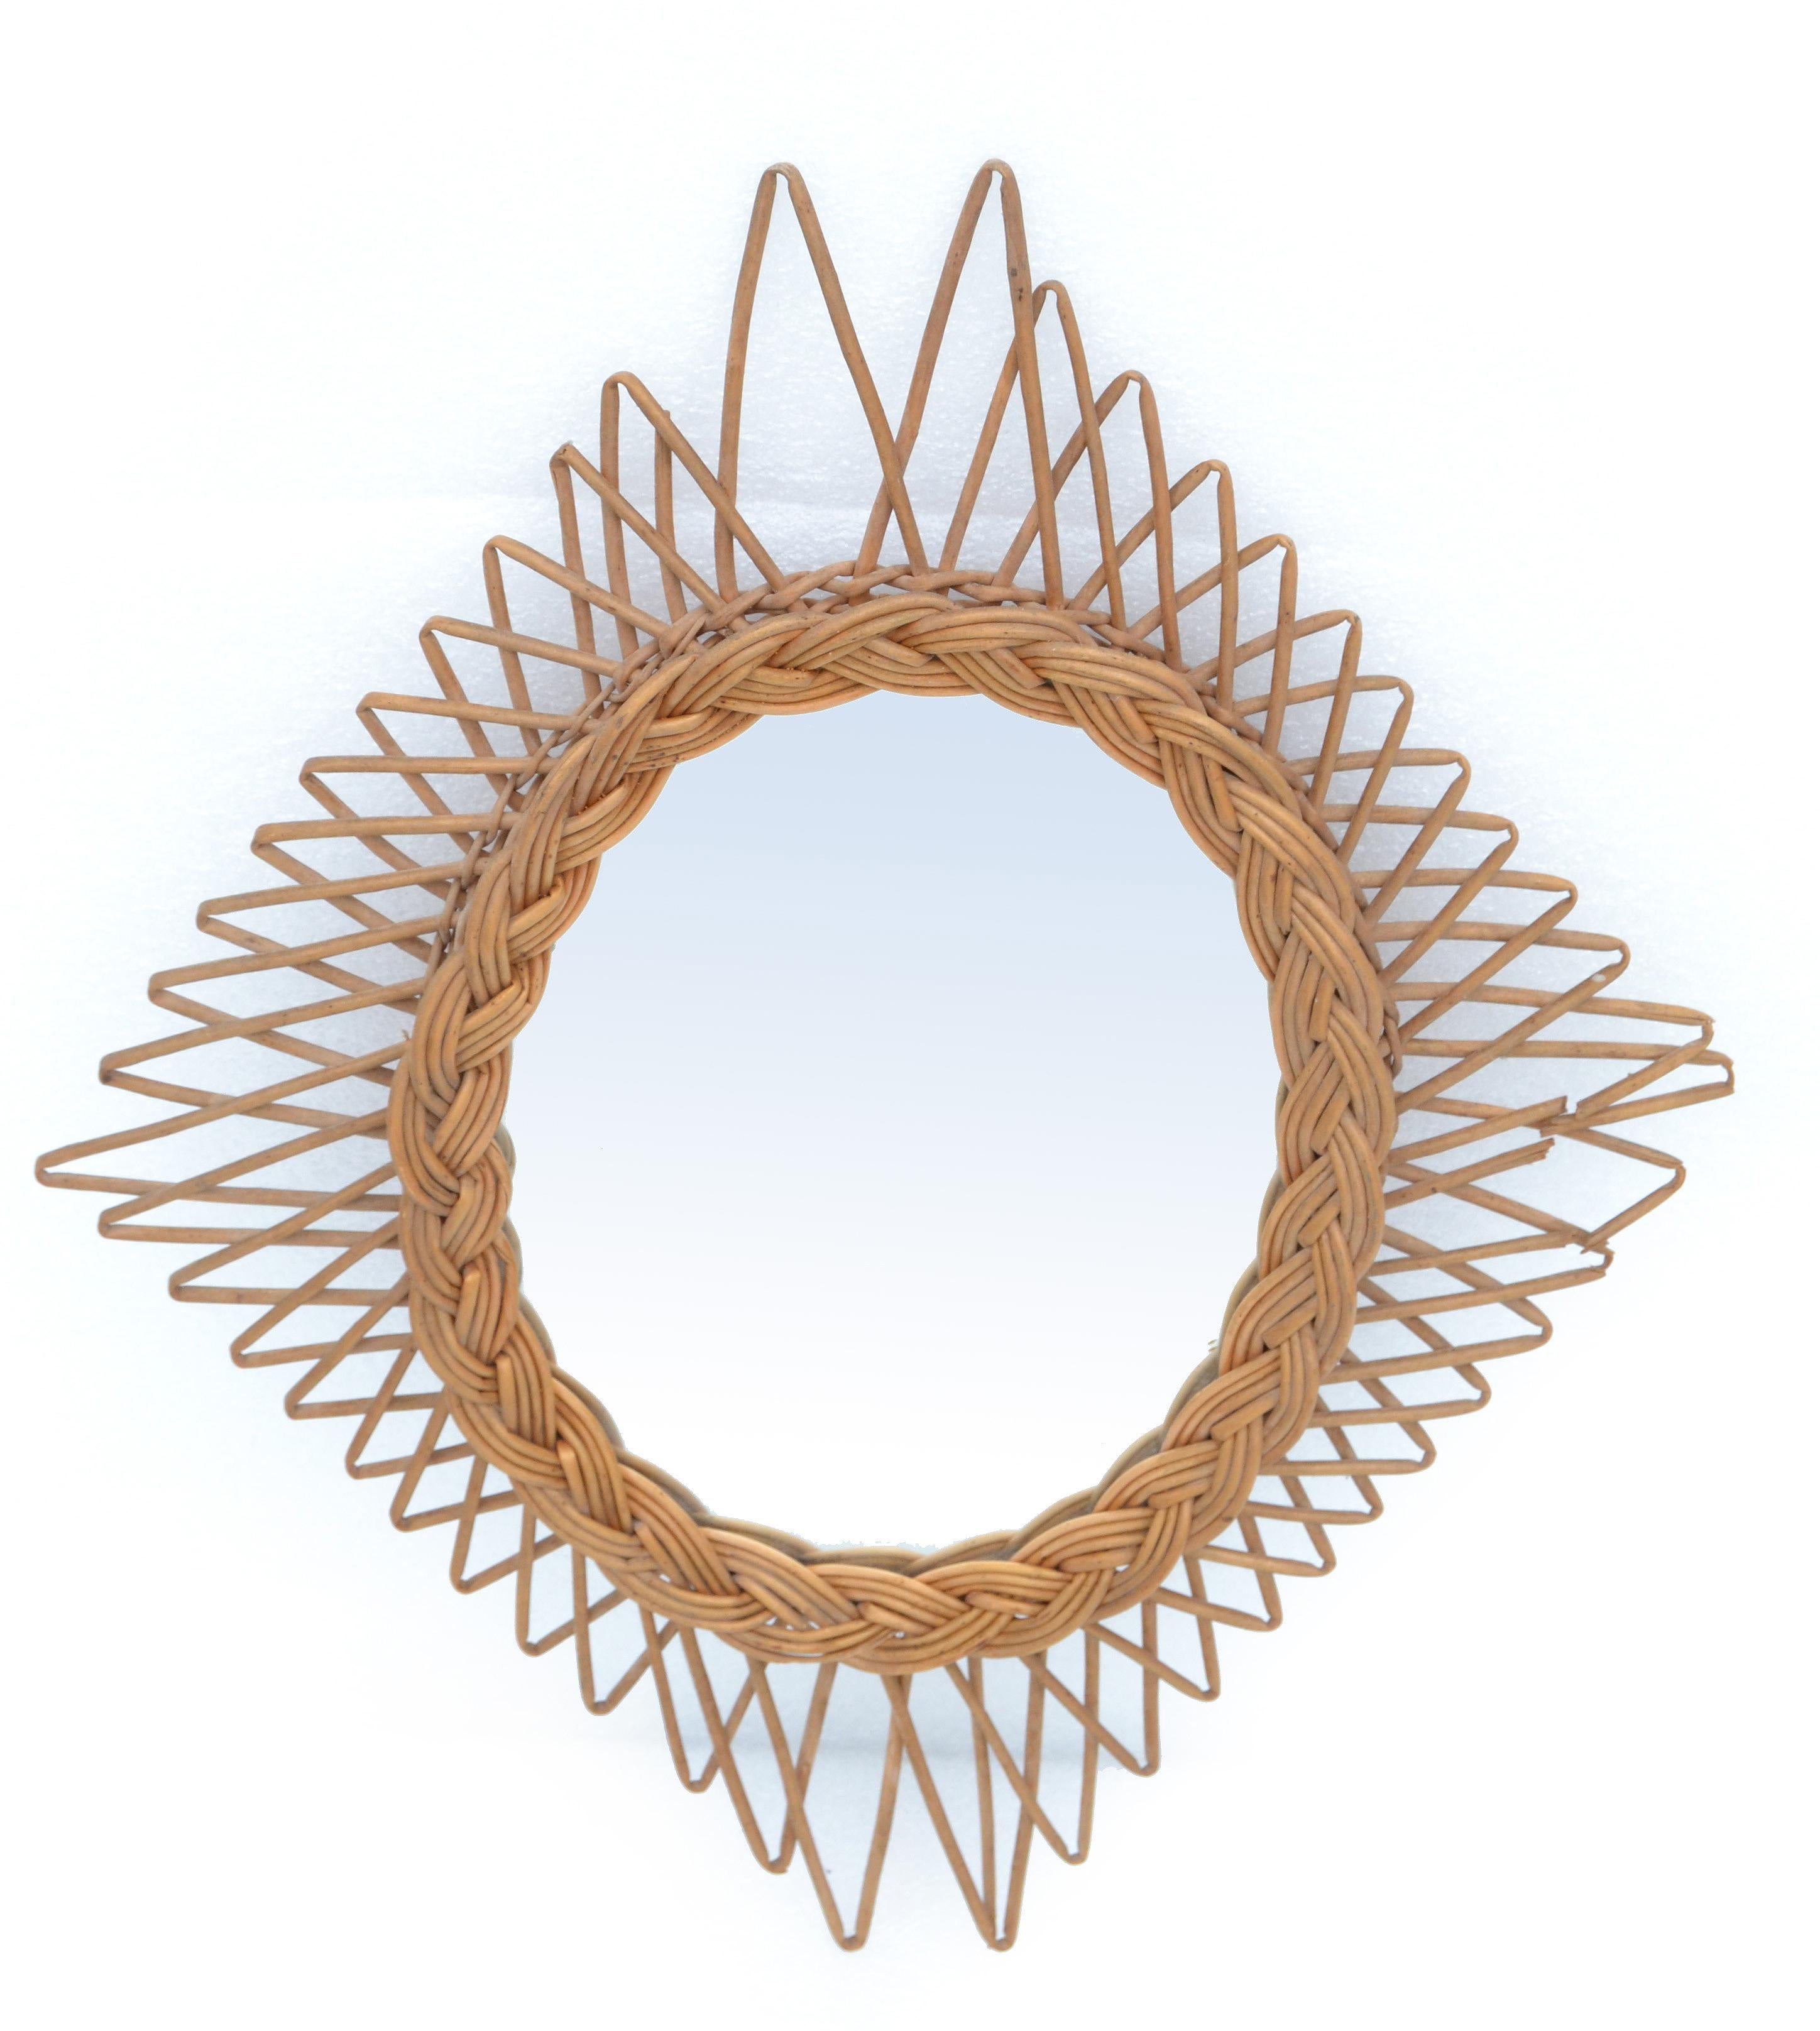 Bohemian Handwoven Wicker Wall Mirror Rhombus Shape French Mid-Century Modern In Good Condition For Sale In Miami, FL